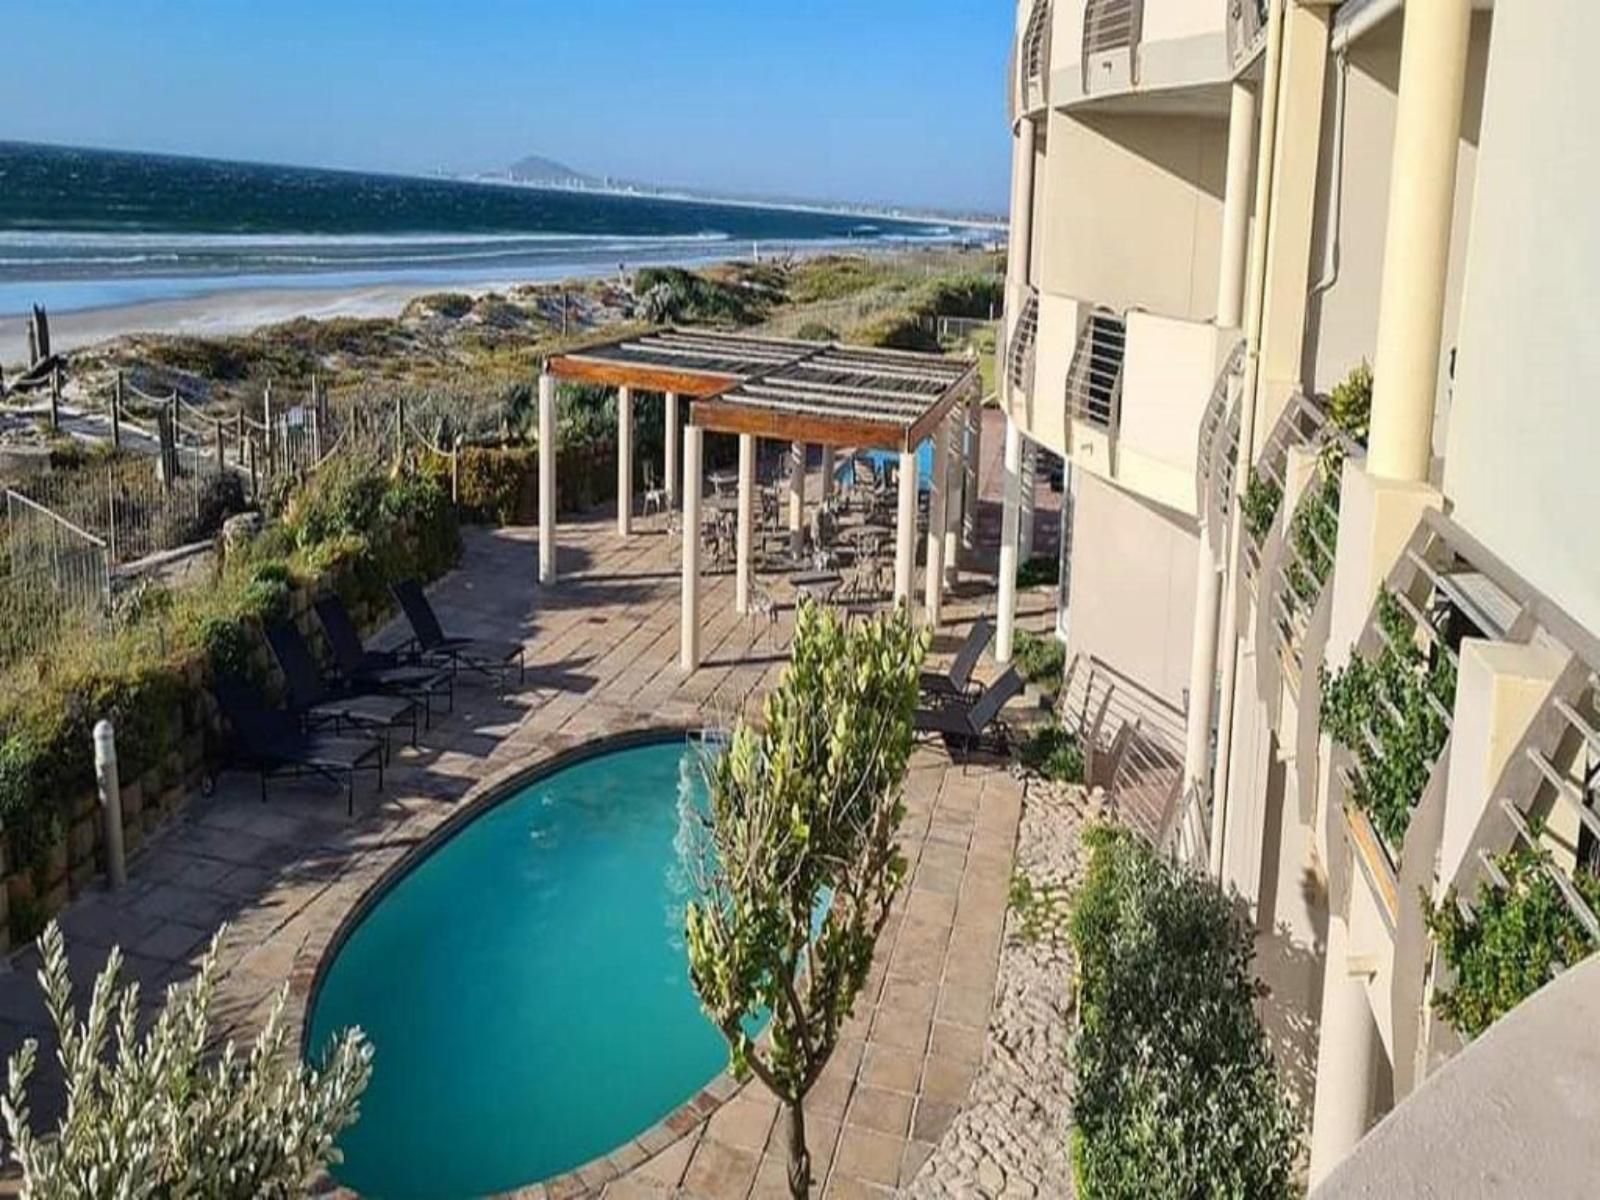 Cape Town Beachfront Apartments At Leisure Bay Lagoon Beach Cape Town Western Cape South Africa Beach, Nature, Sand, Swimming Pool